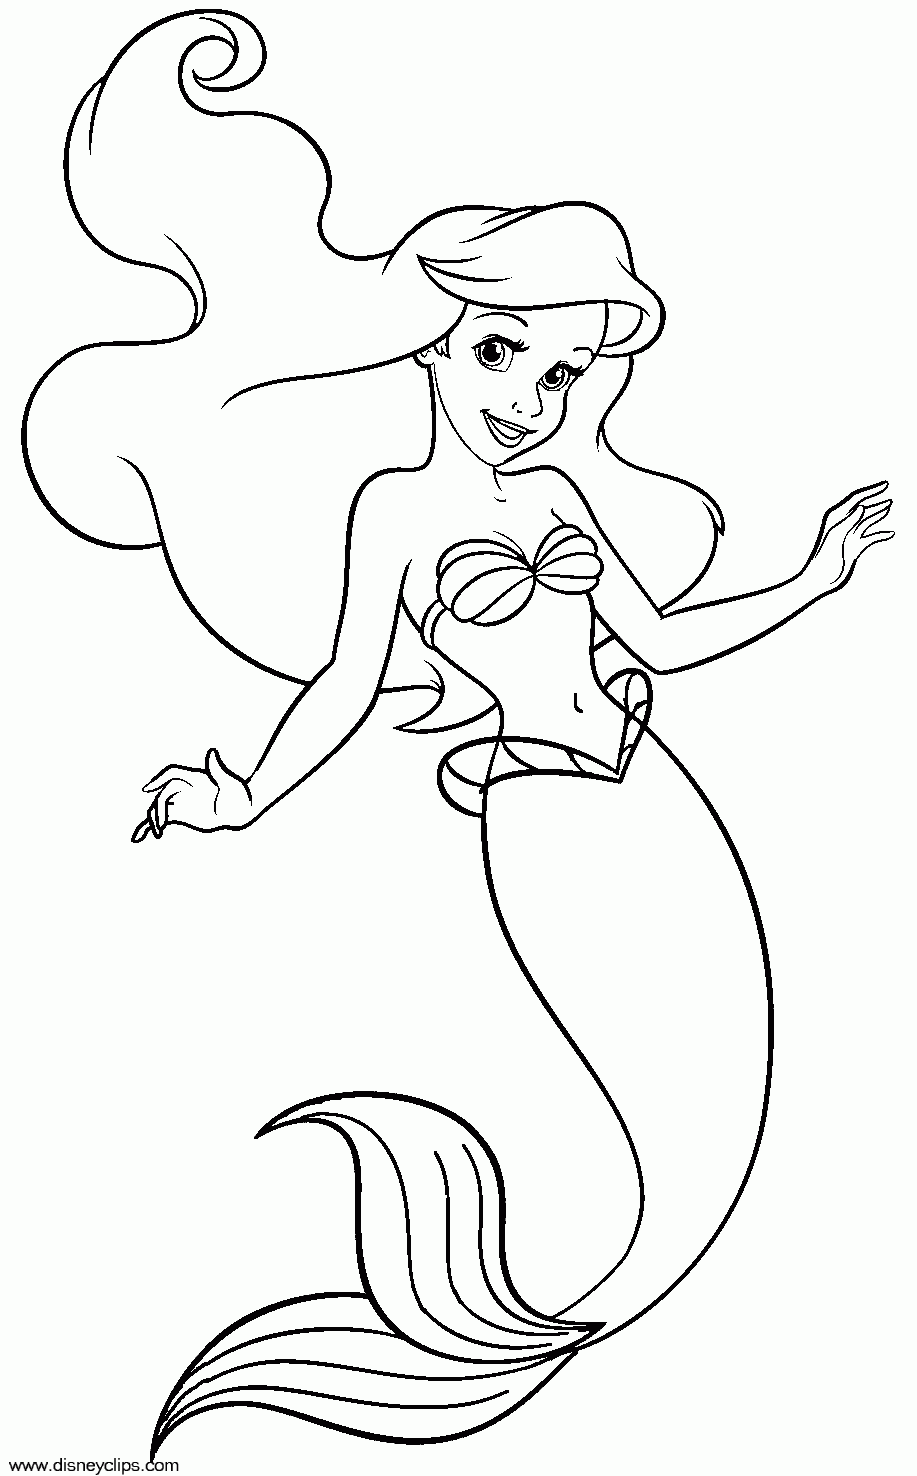 Ariel Mermaid - Coloring Pages for Kids and for Adults